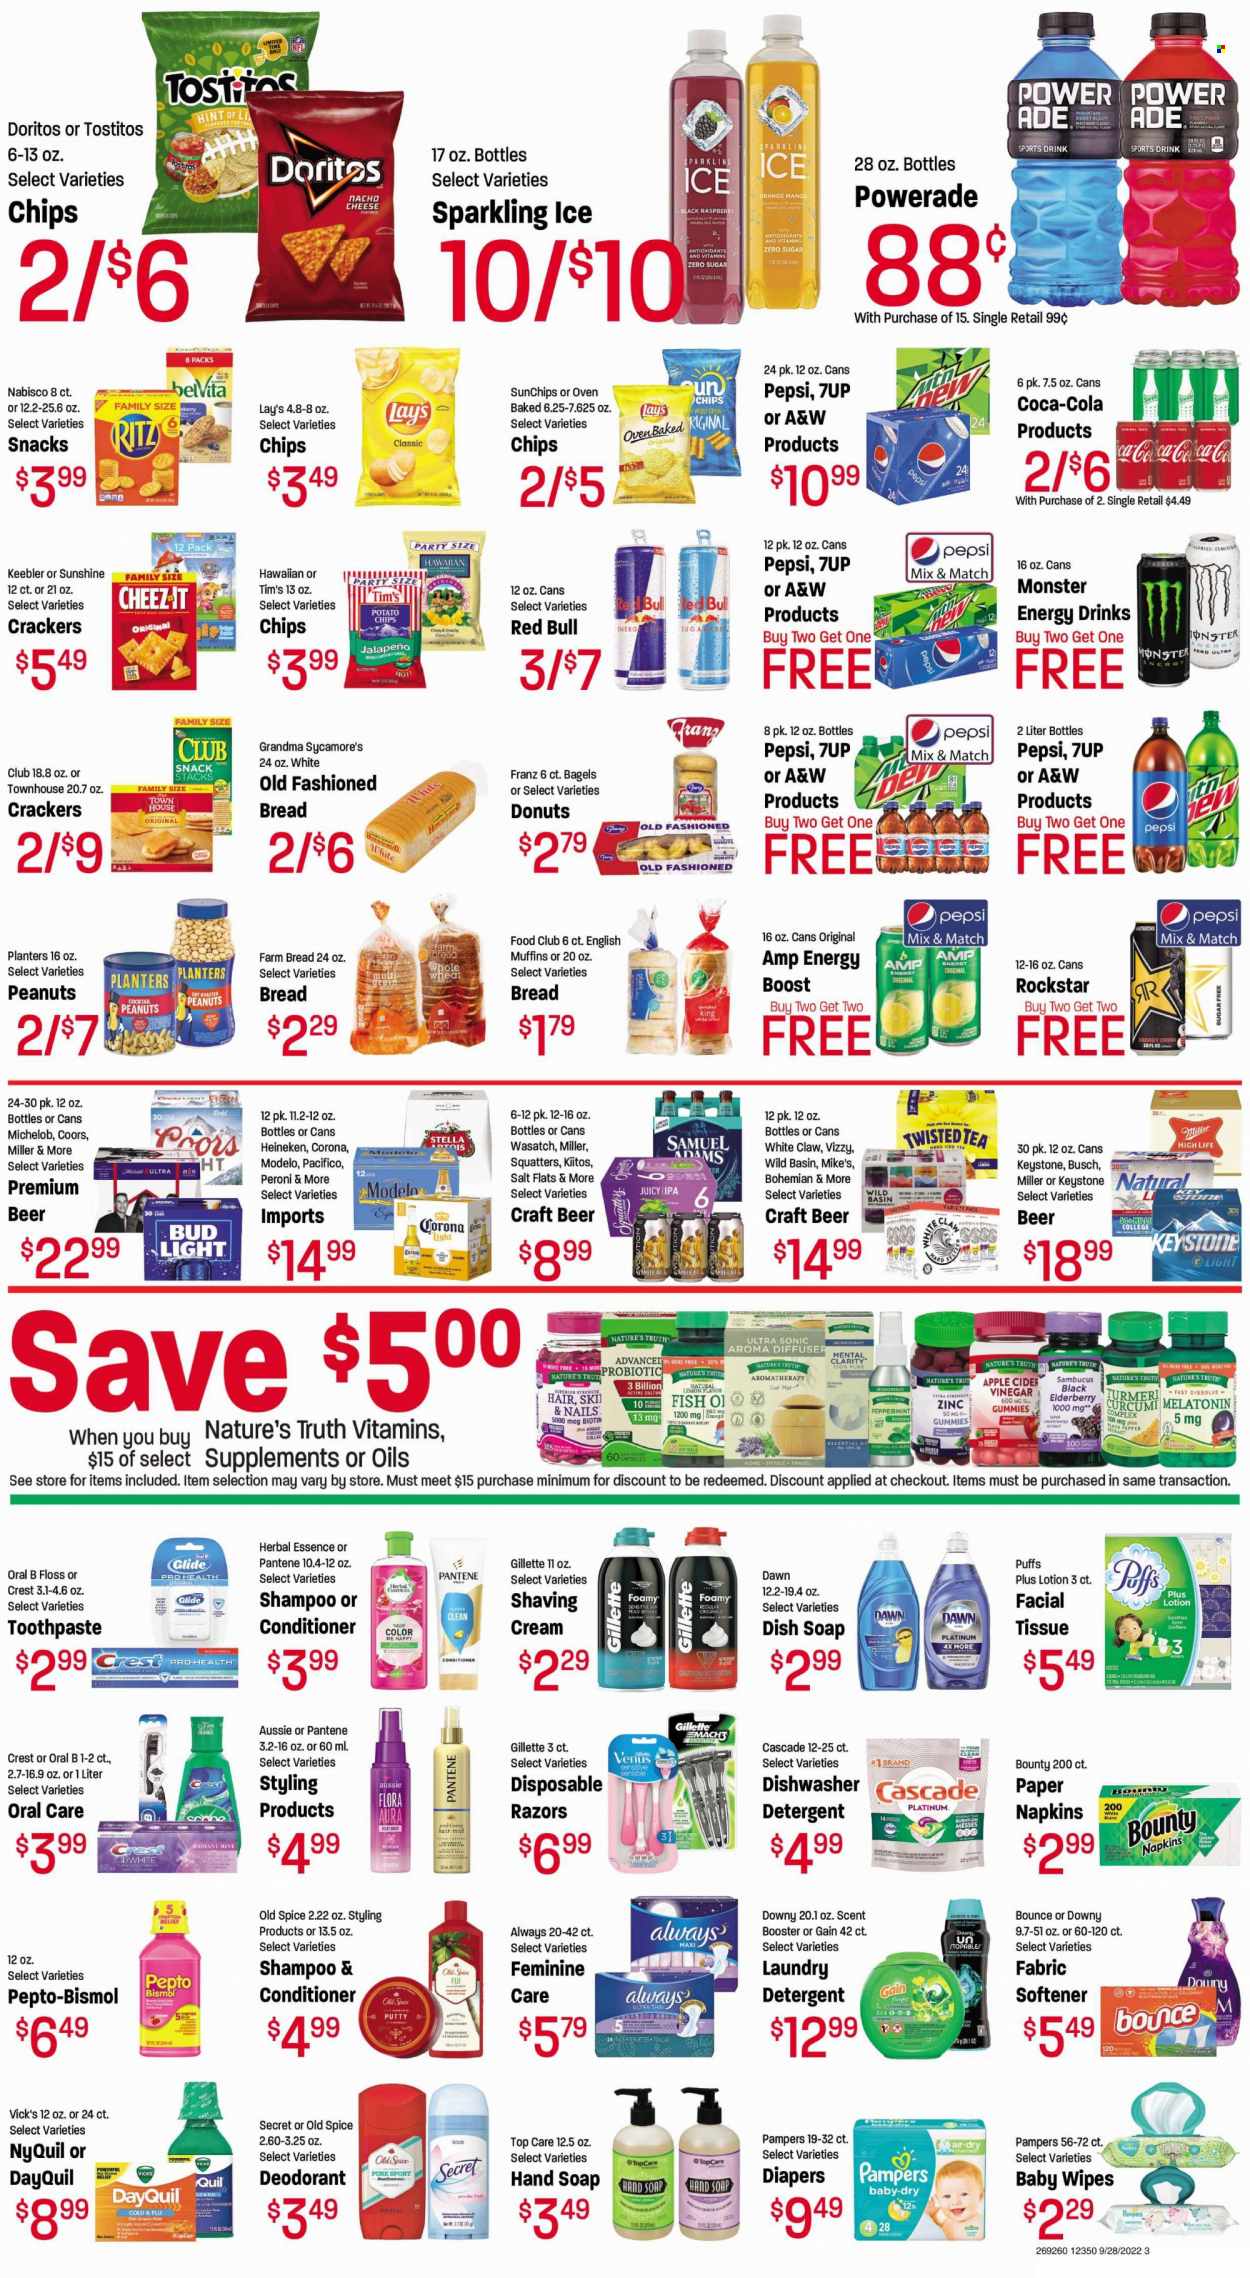 thumbnail - Fresh Market Flyer - 09/28/2022 - 10/11/2022 - Sales products - bagels, bread, english muffins, white bread, puffs, donut, jalapeño, oranges, fish, cheese, Flora, Sunshine, snack, Bounty, crackers, Keebler, RITZ, Doritos, potato chips, chips, Lay’s, Cheez-It, Tostitos, belVita, spice, apple cider vinegar, oil, roasted peanuts, peanuts, Planters, Coca-Cola, Powerade, Pepsi, energy drink, Monster, ice tea, 7UP, Red Bull, Monster Energy, A&W, Rockstar, Boost, punch, White Claw, beer, Busch, Corona Extra, Heineken, Peroni, Miller, IPA, Keystone, Modelo, wipes, Pampers, baby wipes, napkins, nappies, tissues, detergent, Gain, Cascade, fabric softener, laundry detergent, Downy Laundry, shampoo, hand soap, Old Spice, soap, Oral-B, toothpaste, Crest, Aussie, conditioner, Pantene, anti-perspirant, deodorant, Gillette, Venus, disposable razor, Vicks, diffuser, Biotin, DayQuil, Cold & Flu, Melatonin, Nature's Truth, Pepto-bismol, NyQuil, zinc, Stella Artois, Coors, Twisted Tea, Michelob. Page 3.